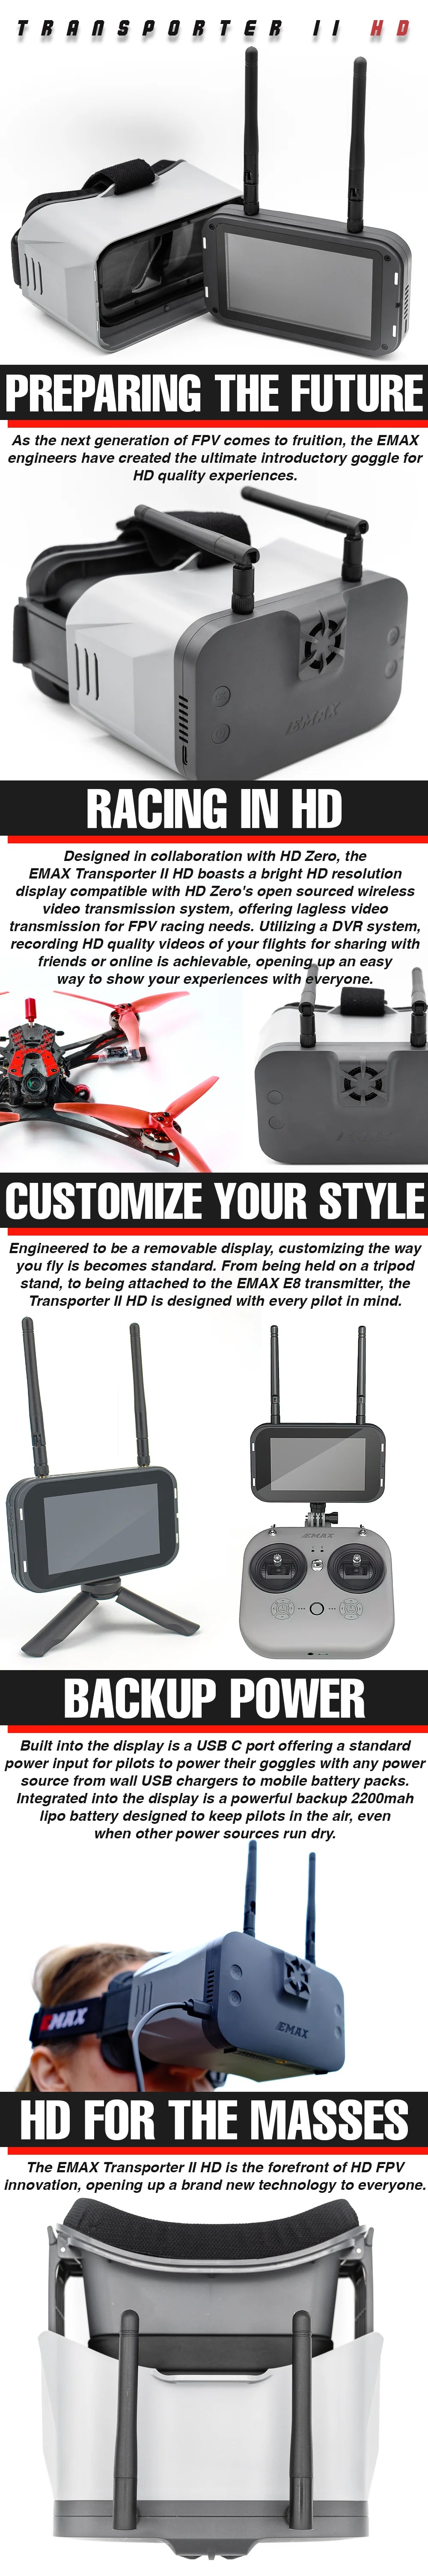 EMAX engineers have created the ultimate introductory goggle for HD quality experiences .